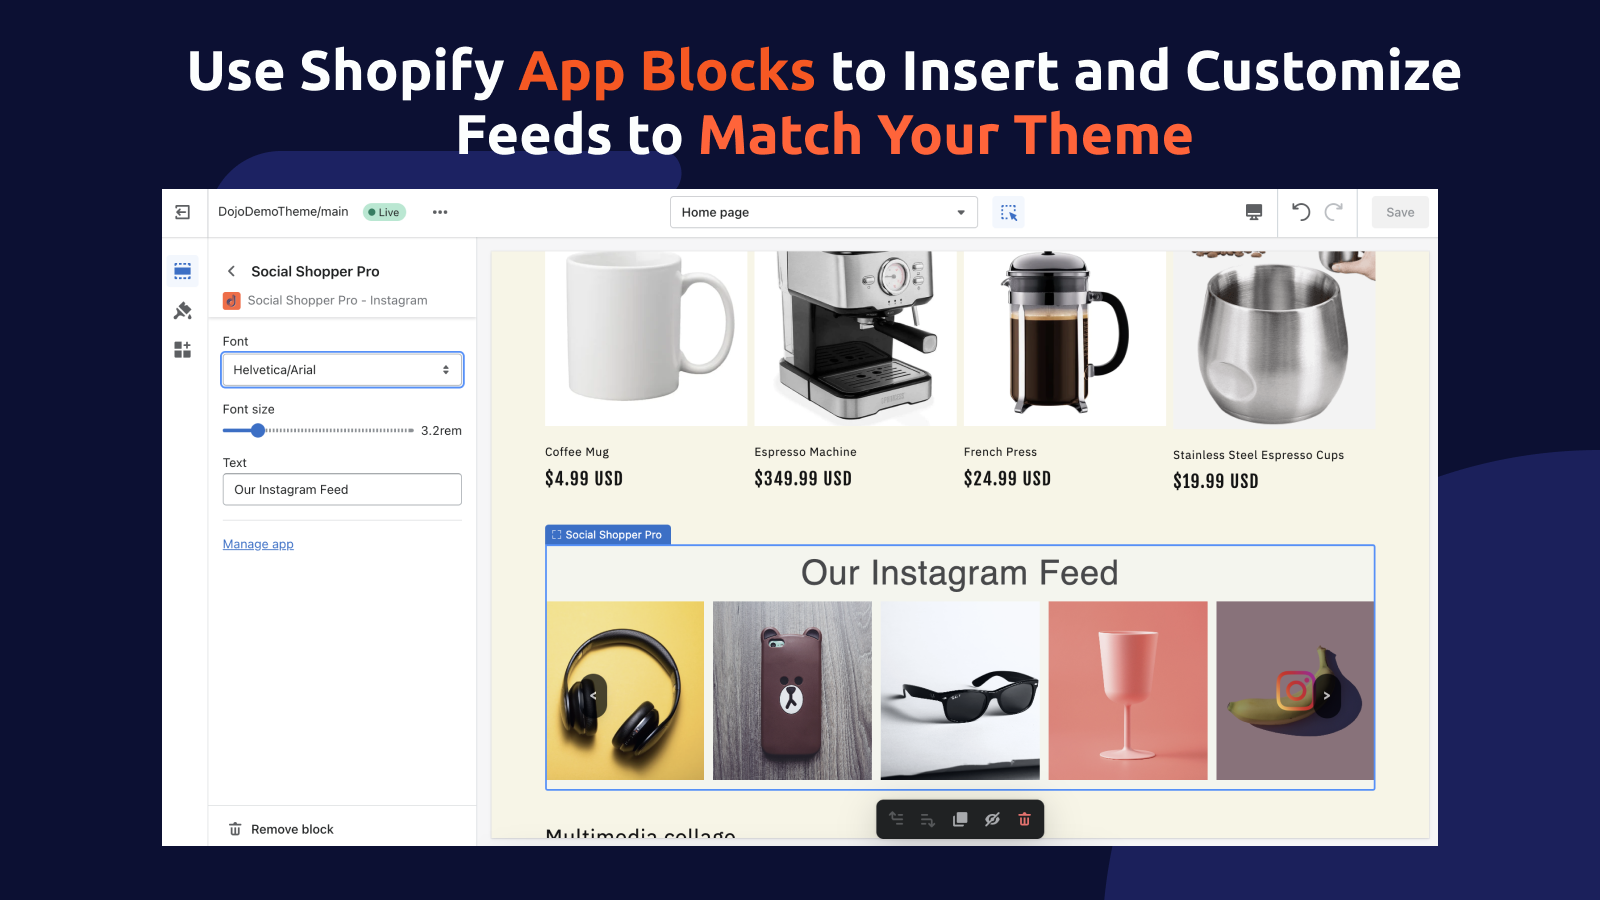 Easily Customize Feeds and Place Feeds Anywhere in Your Store